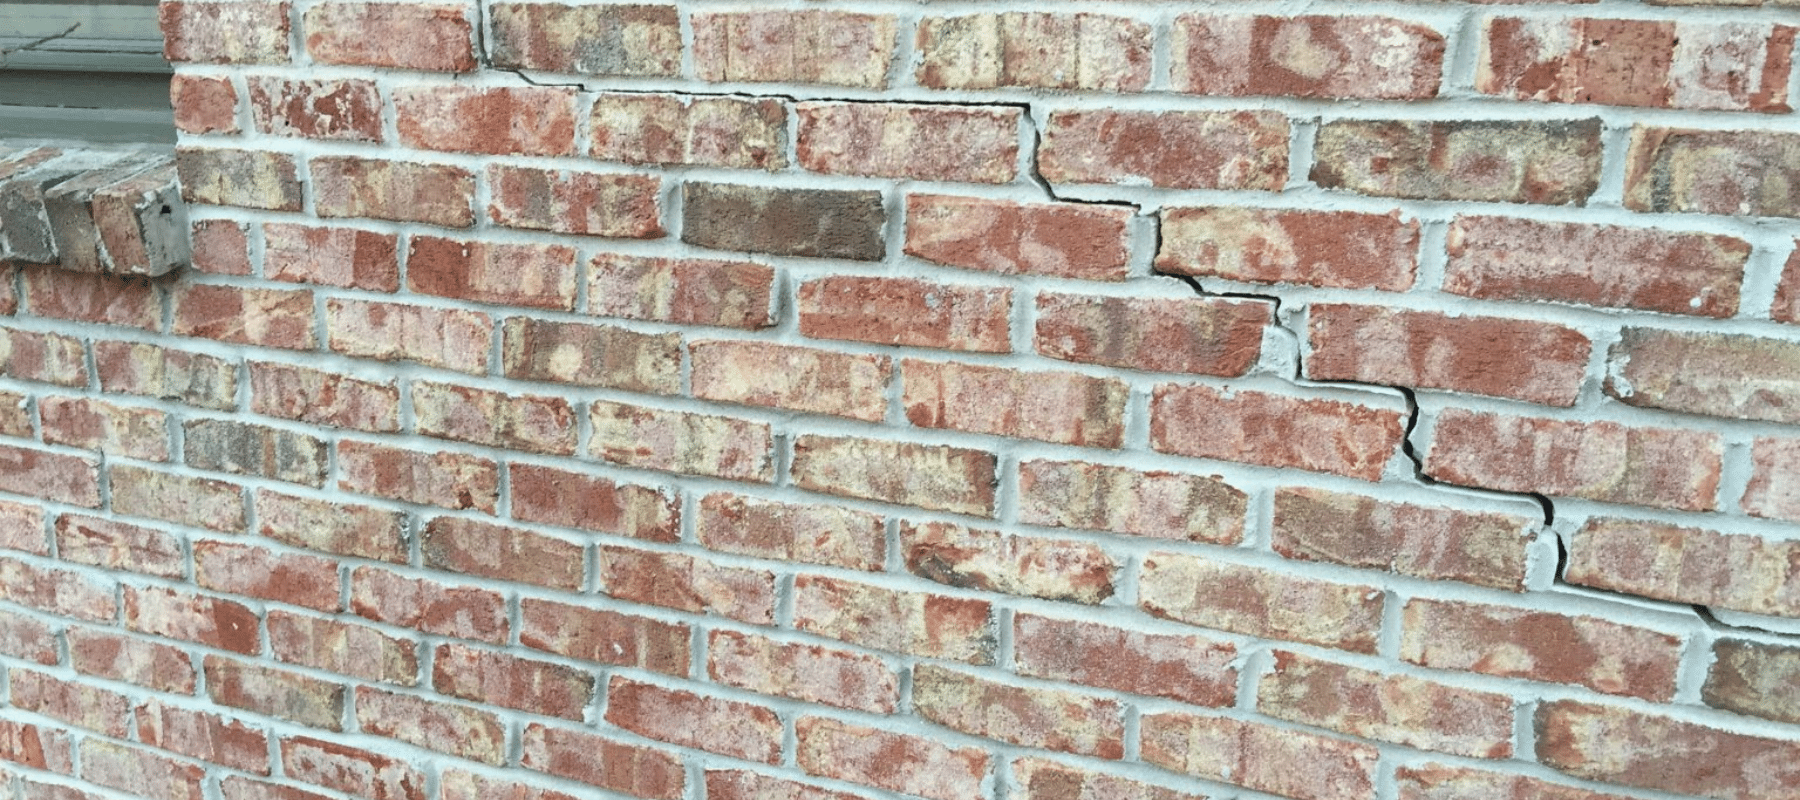 A close up of a brick wall with a crack through it